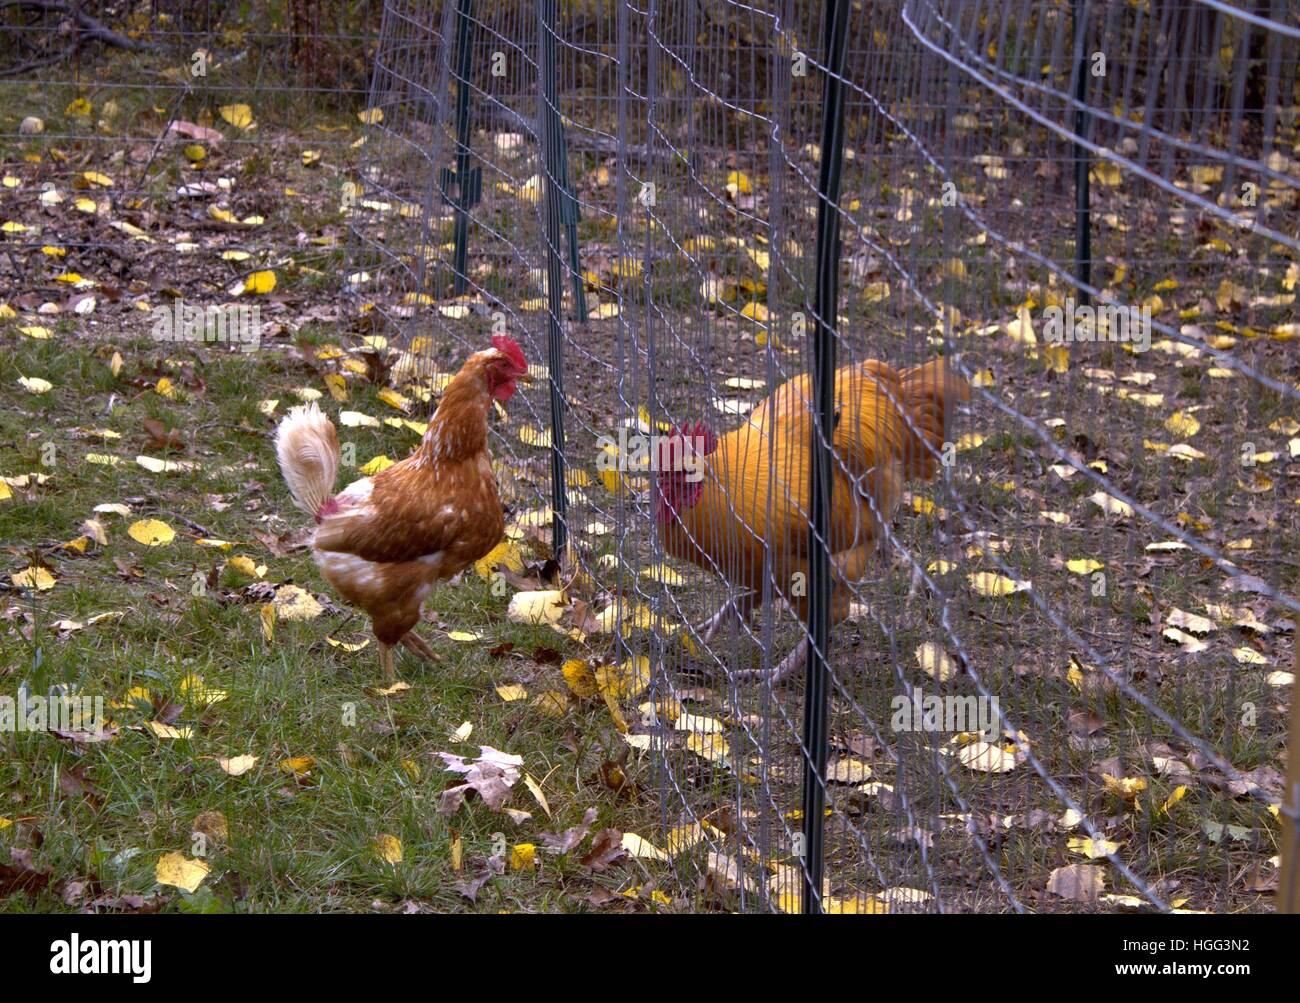 An Old Beat Up Biddy Meets The Rooster Of The Yard Through The Fence Stock Photo